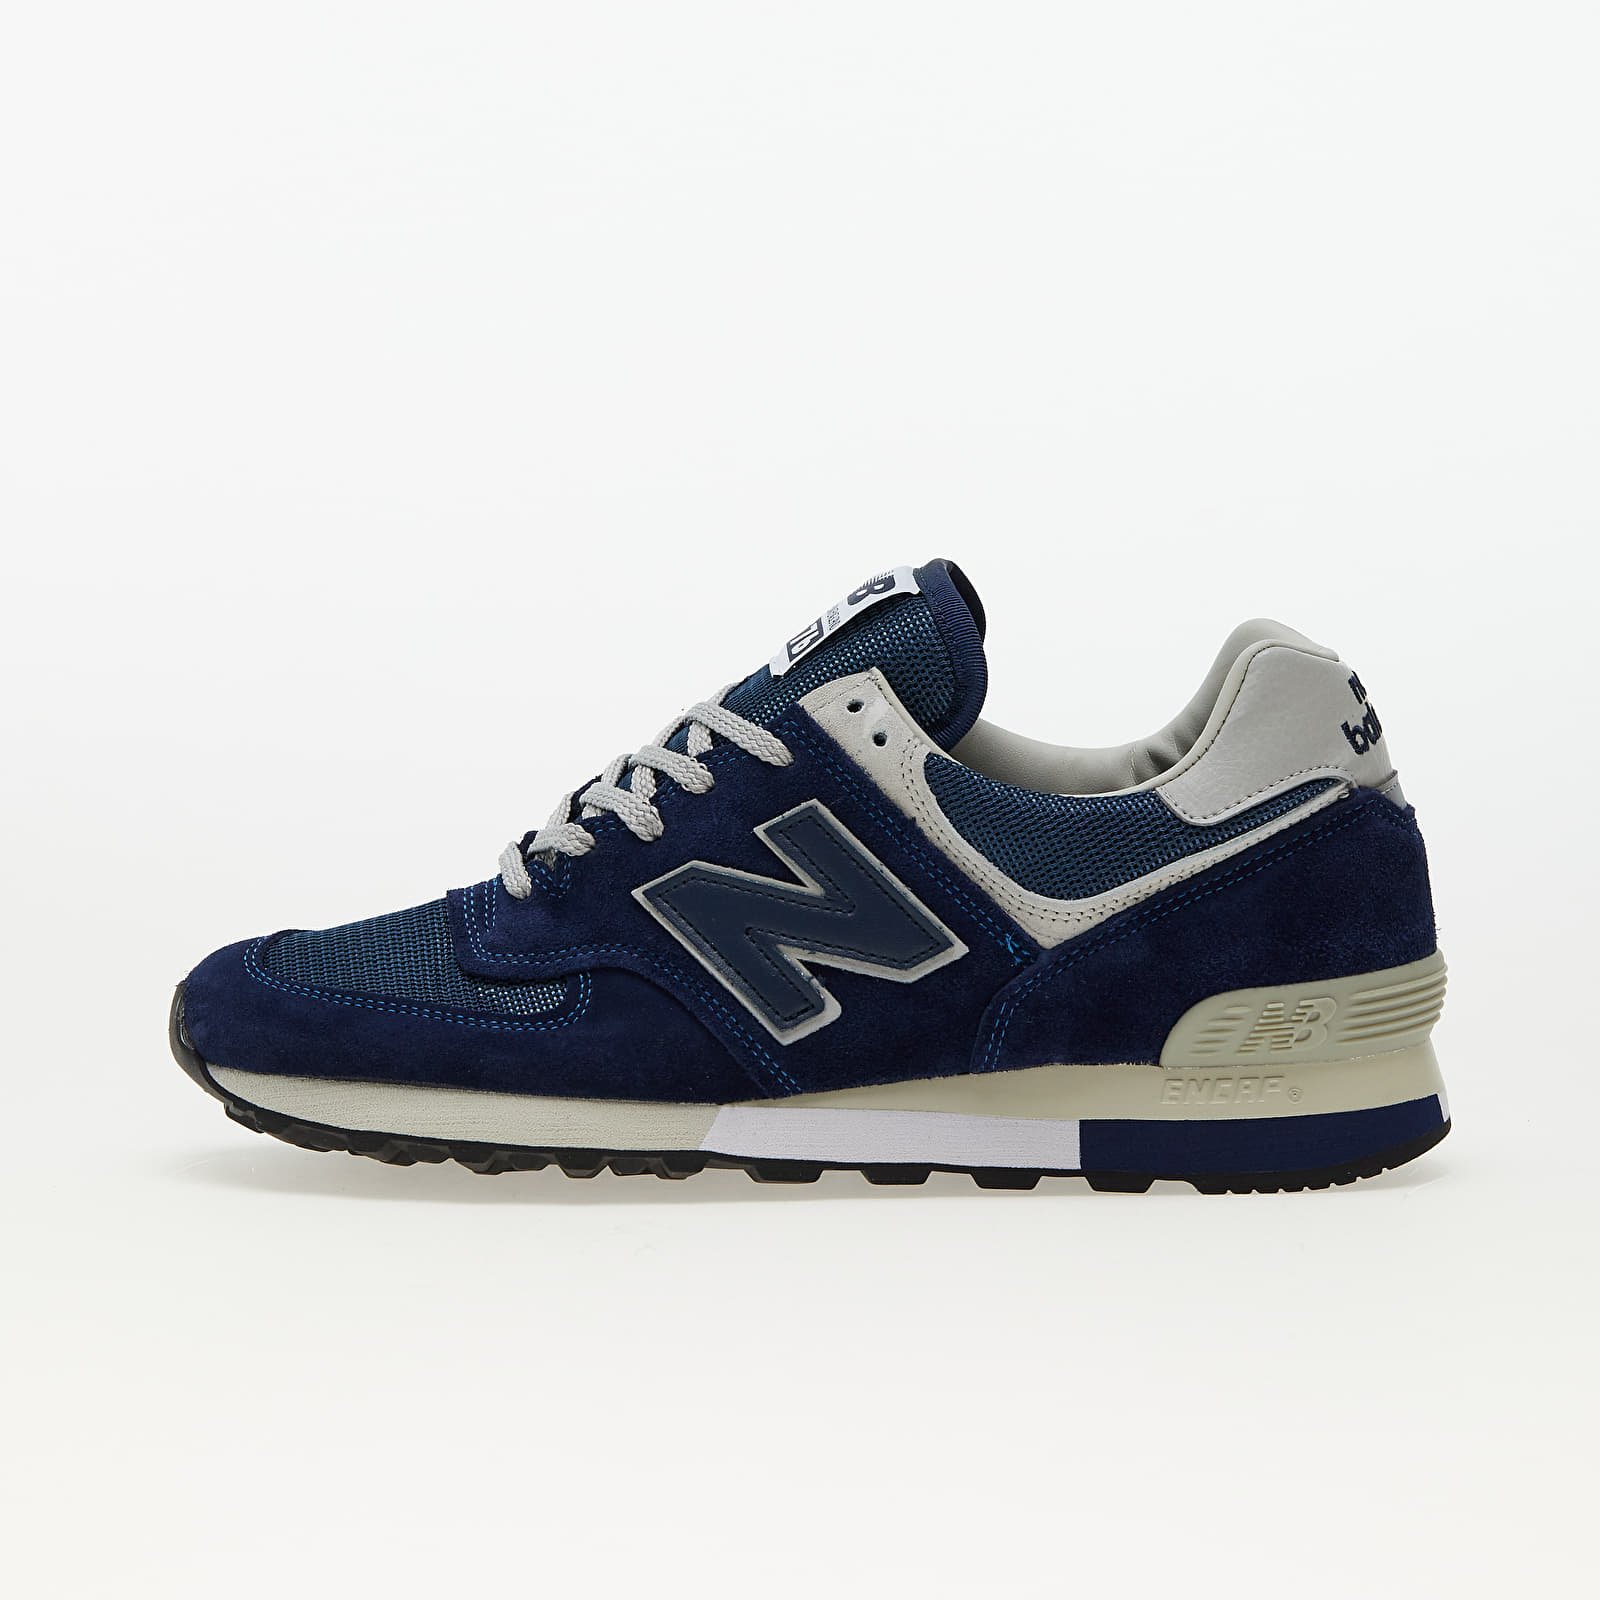 Men's shoes New Balance 576 Made in UK Navy